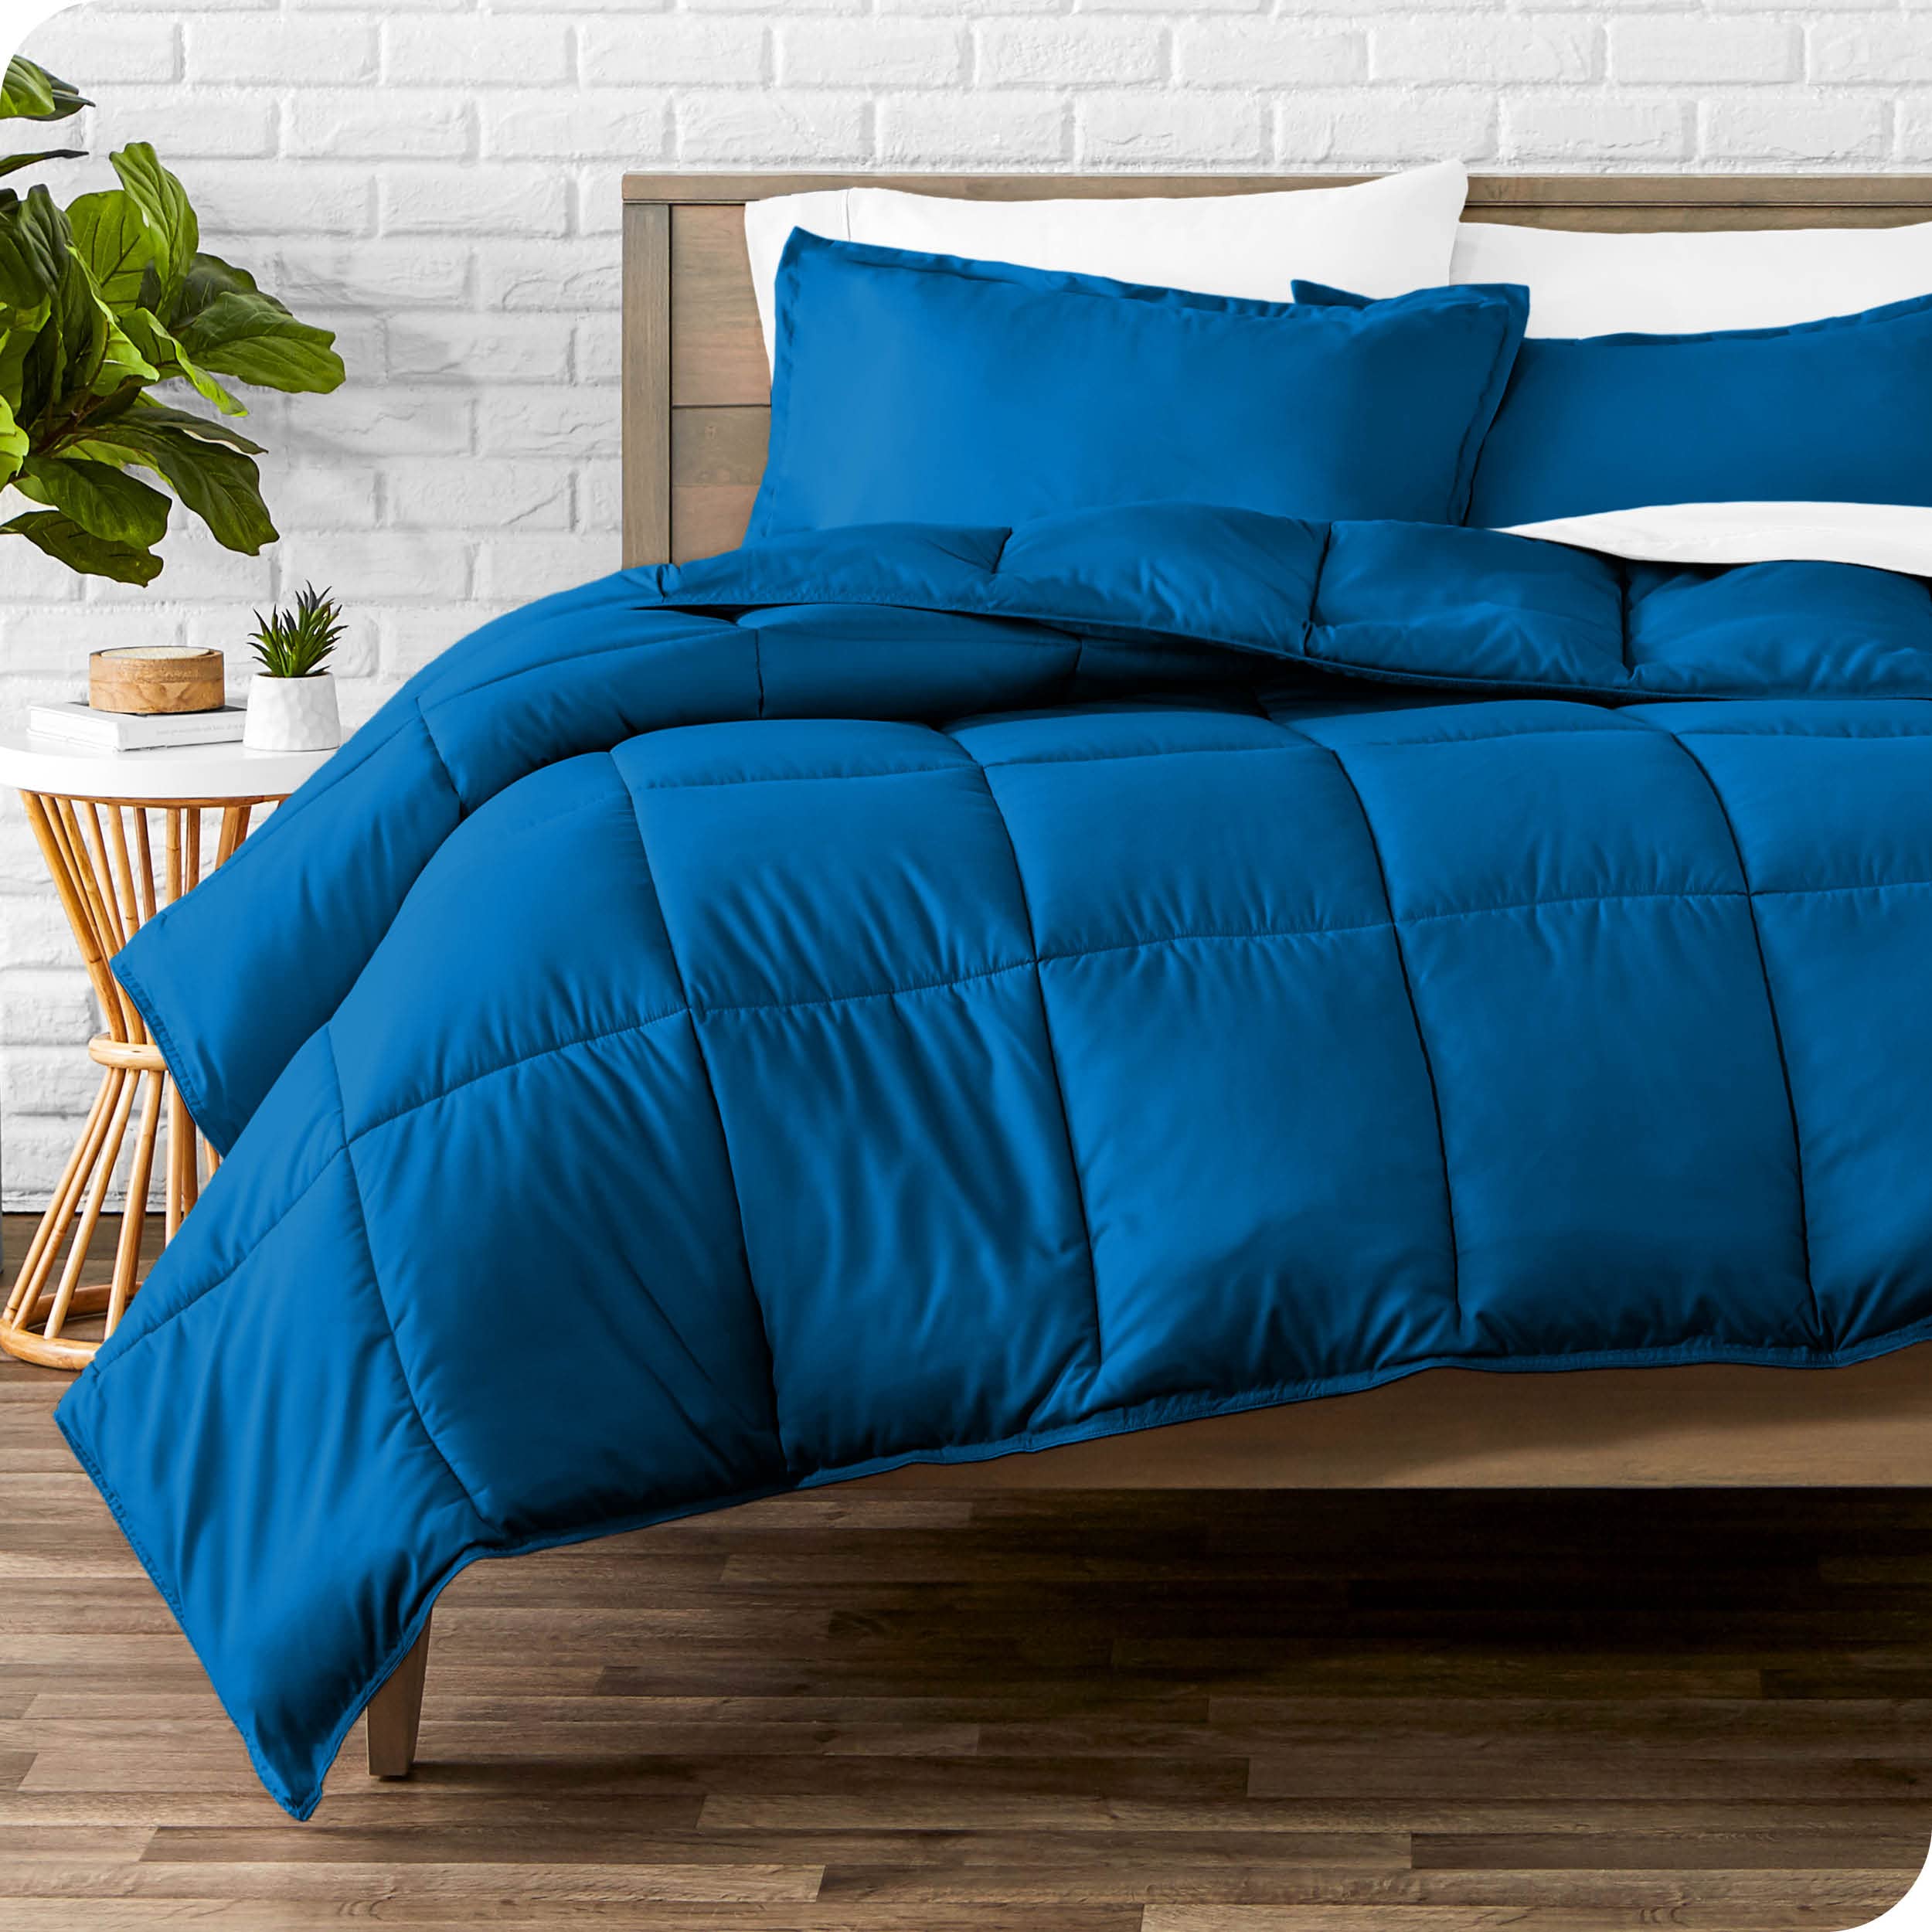 Book Cover Bare Home Comforter Set - Twin/Twin Extra Long Size - Ultra-Soft - Goose Down Alternative - Premium 1800 Series - All Season Warmth (Twin/Twin XL, Medium Blue) Twin/Twin XL 11 - Medium Blue